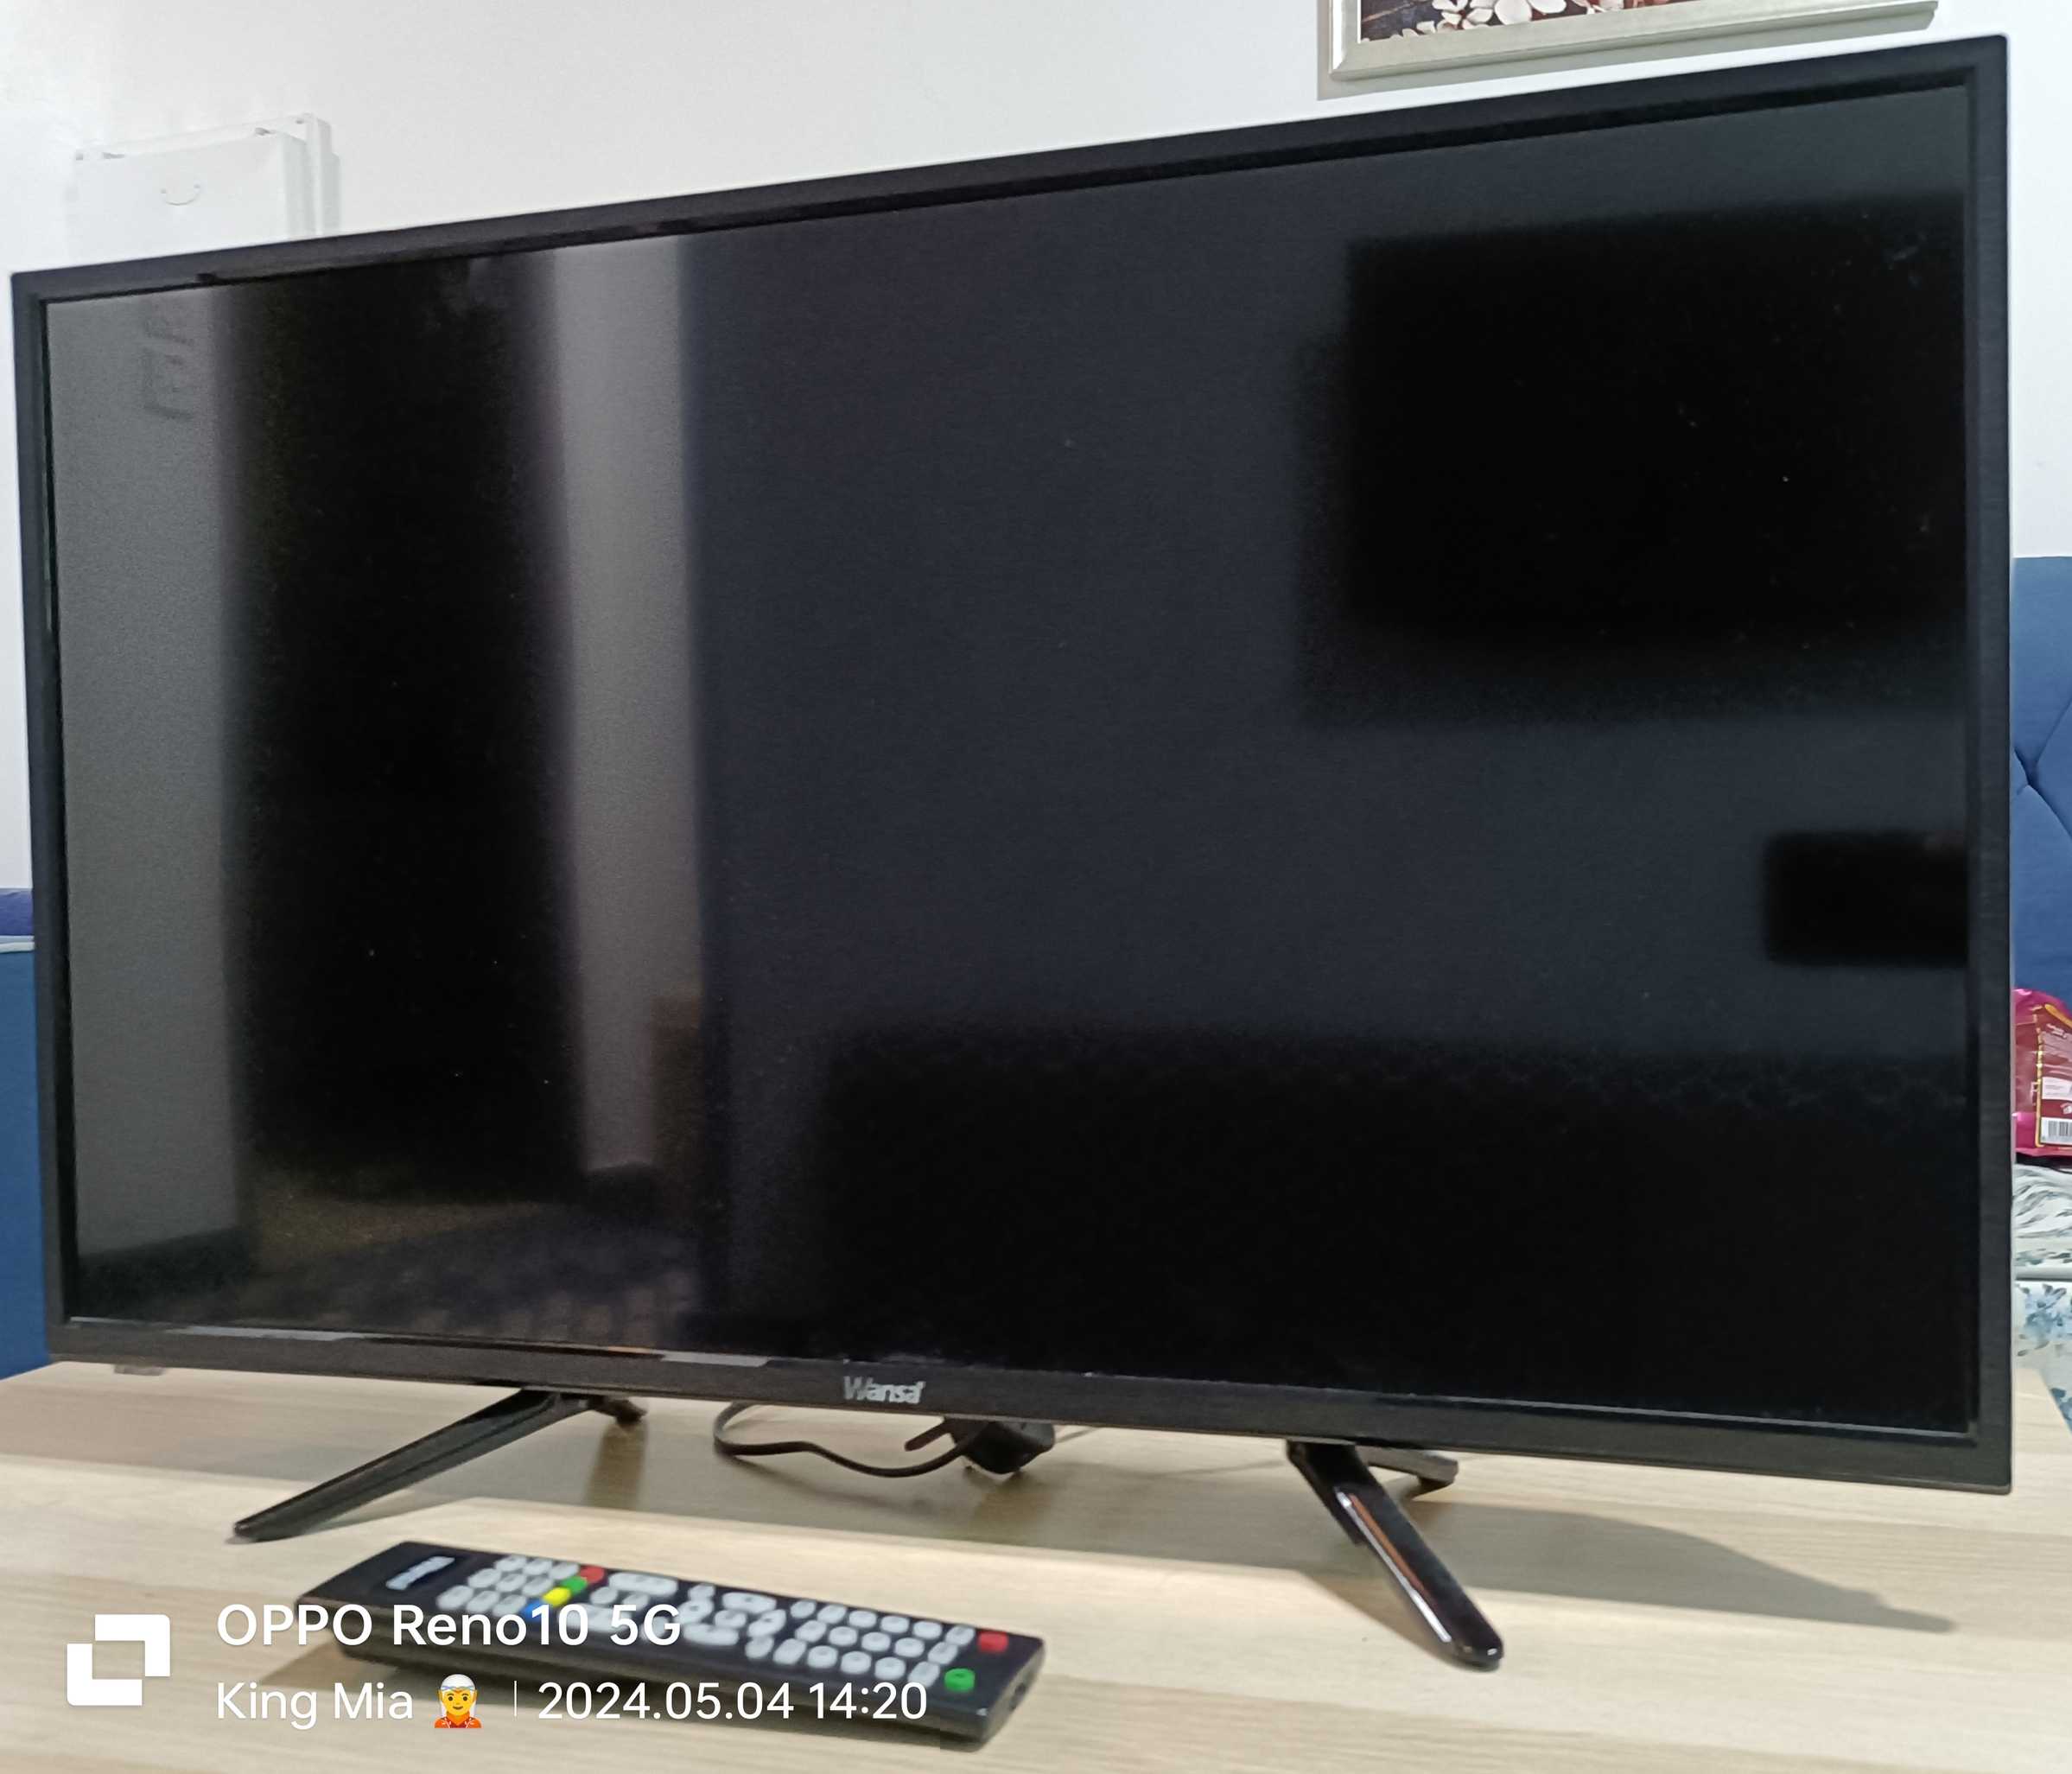 Wansa LED 32" with Remote control for Sale in brand new condition. 